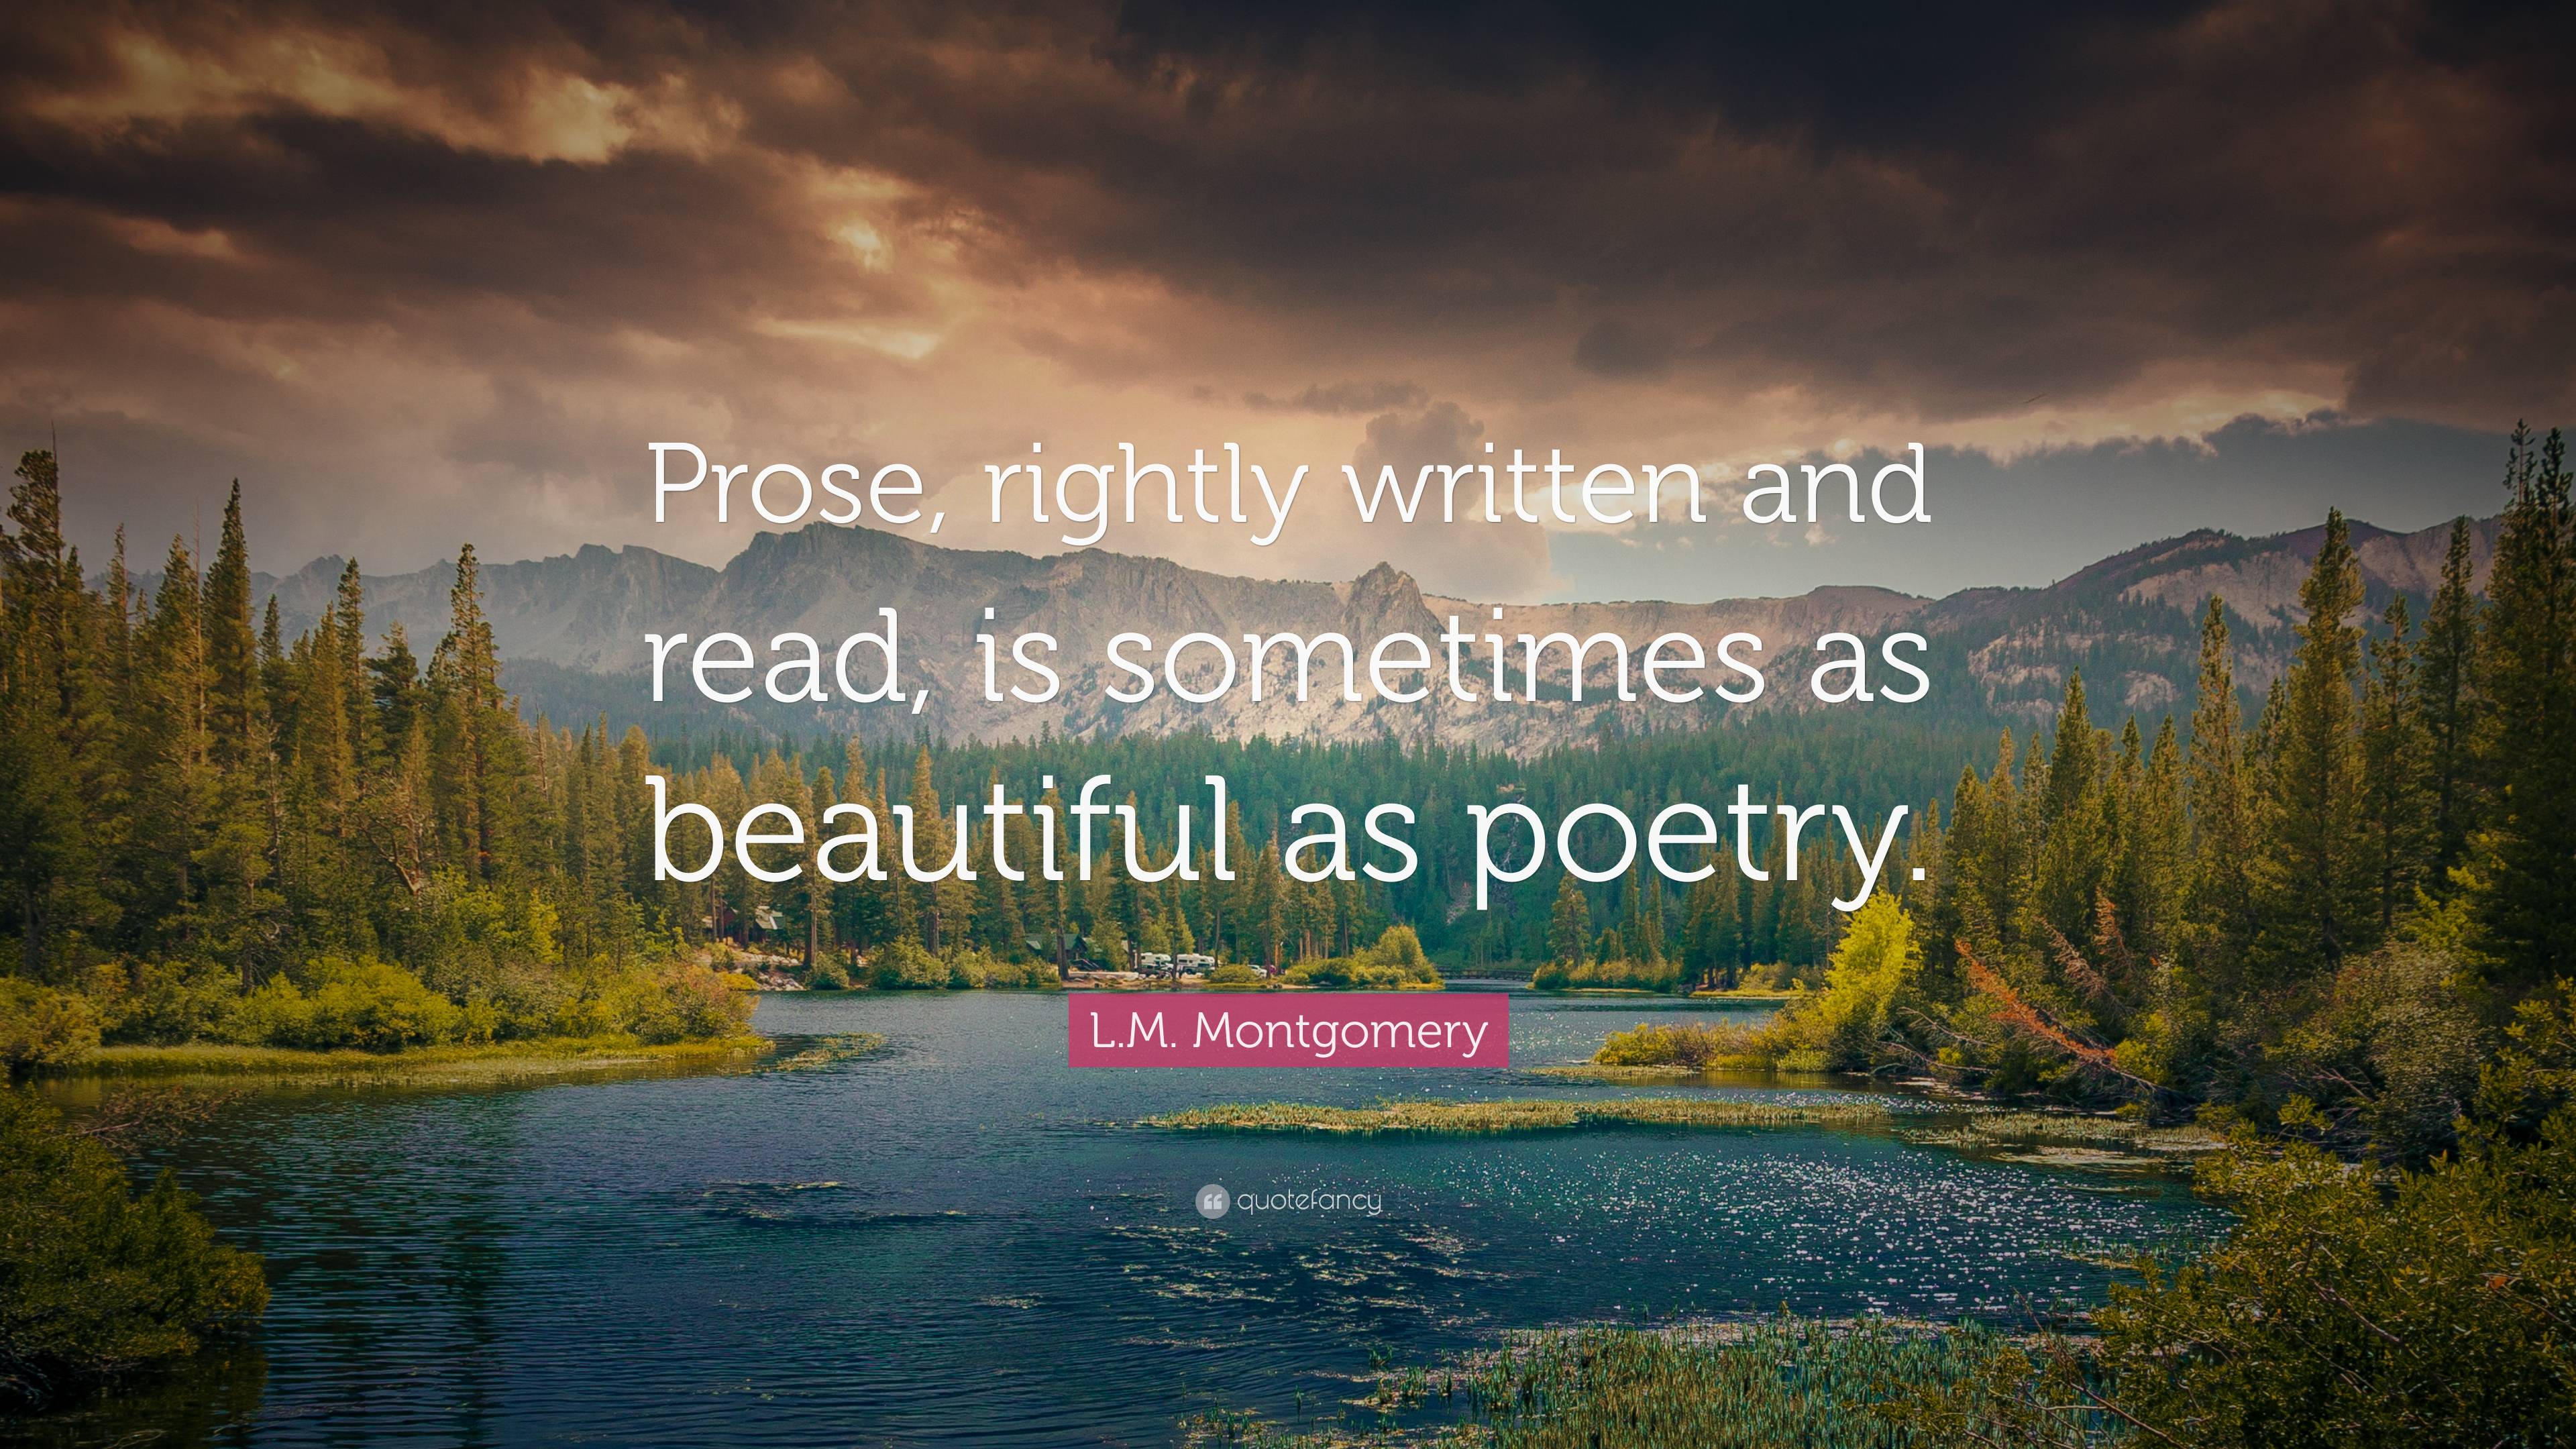 L.M. Montgomery Quote: “Prose, rightly written and read, is sometimes ...